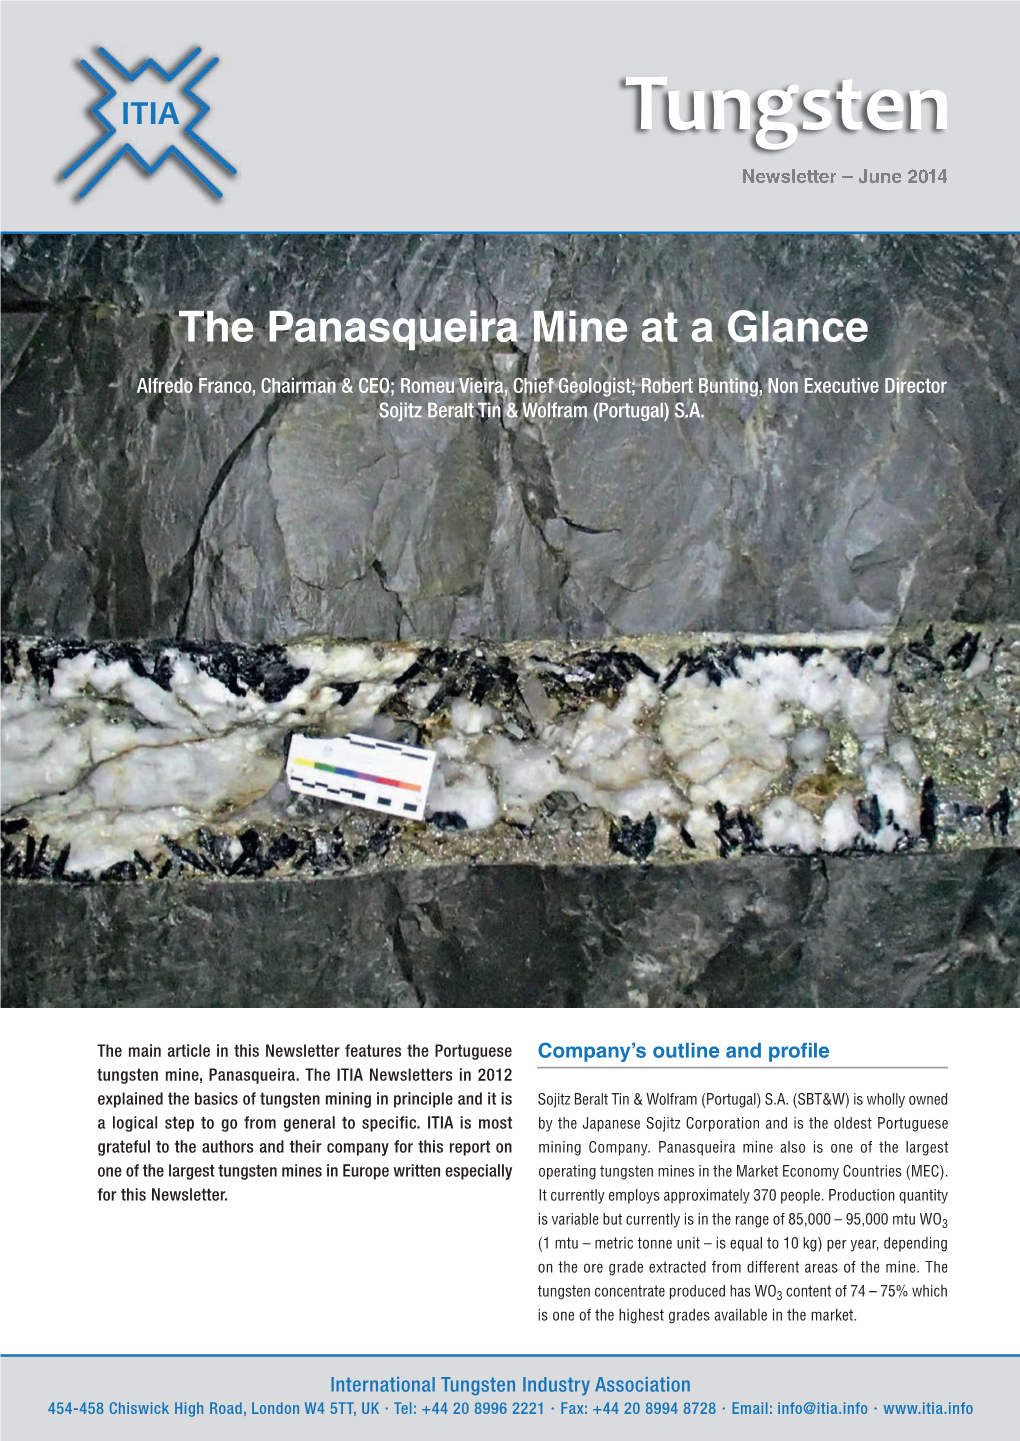 The Panasqueira Mine at a Glance